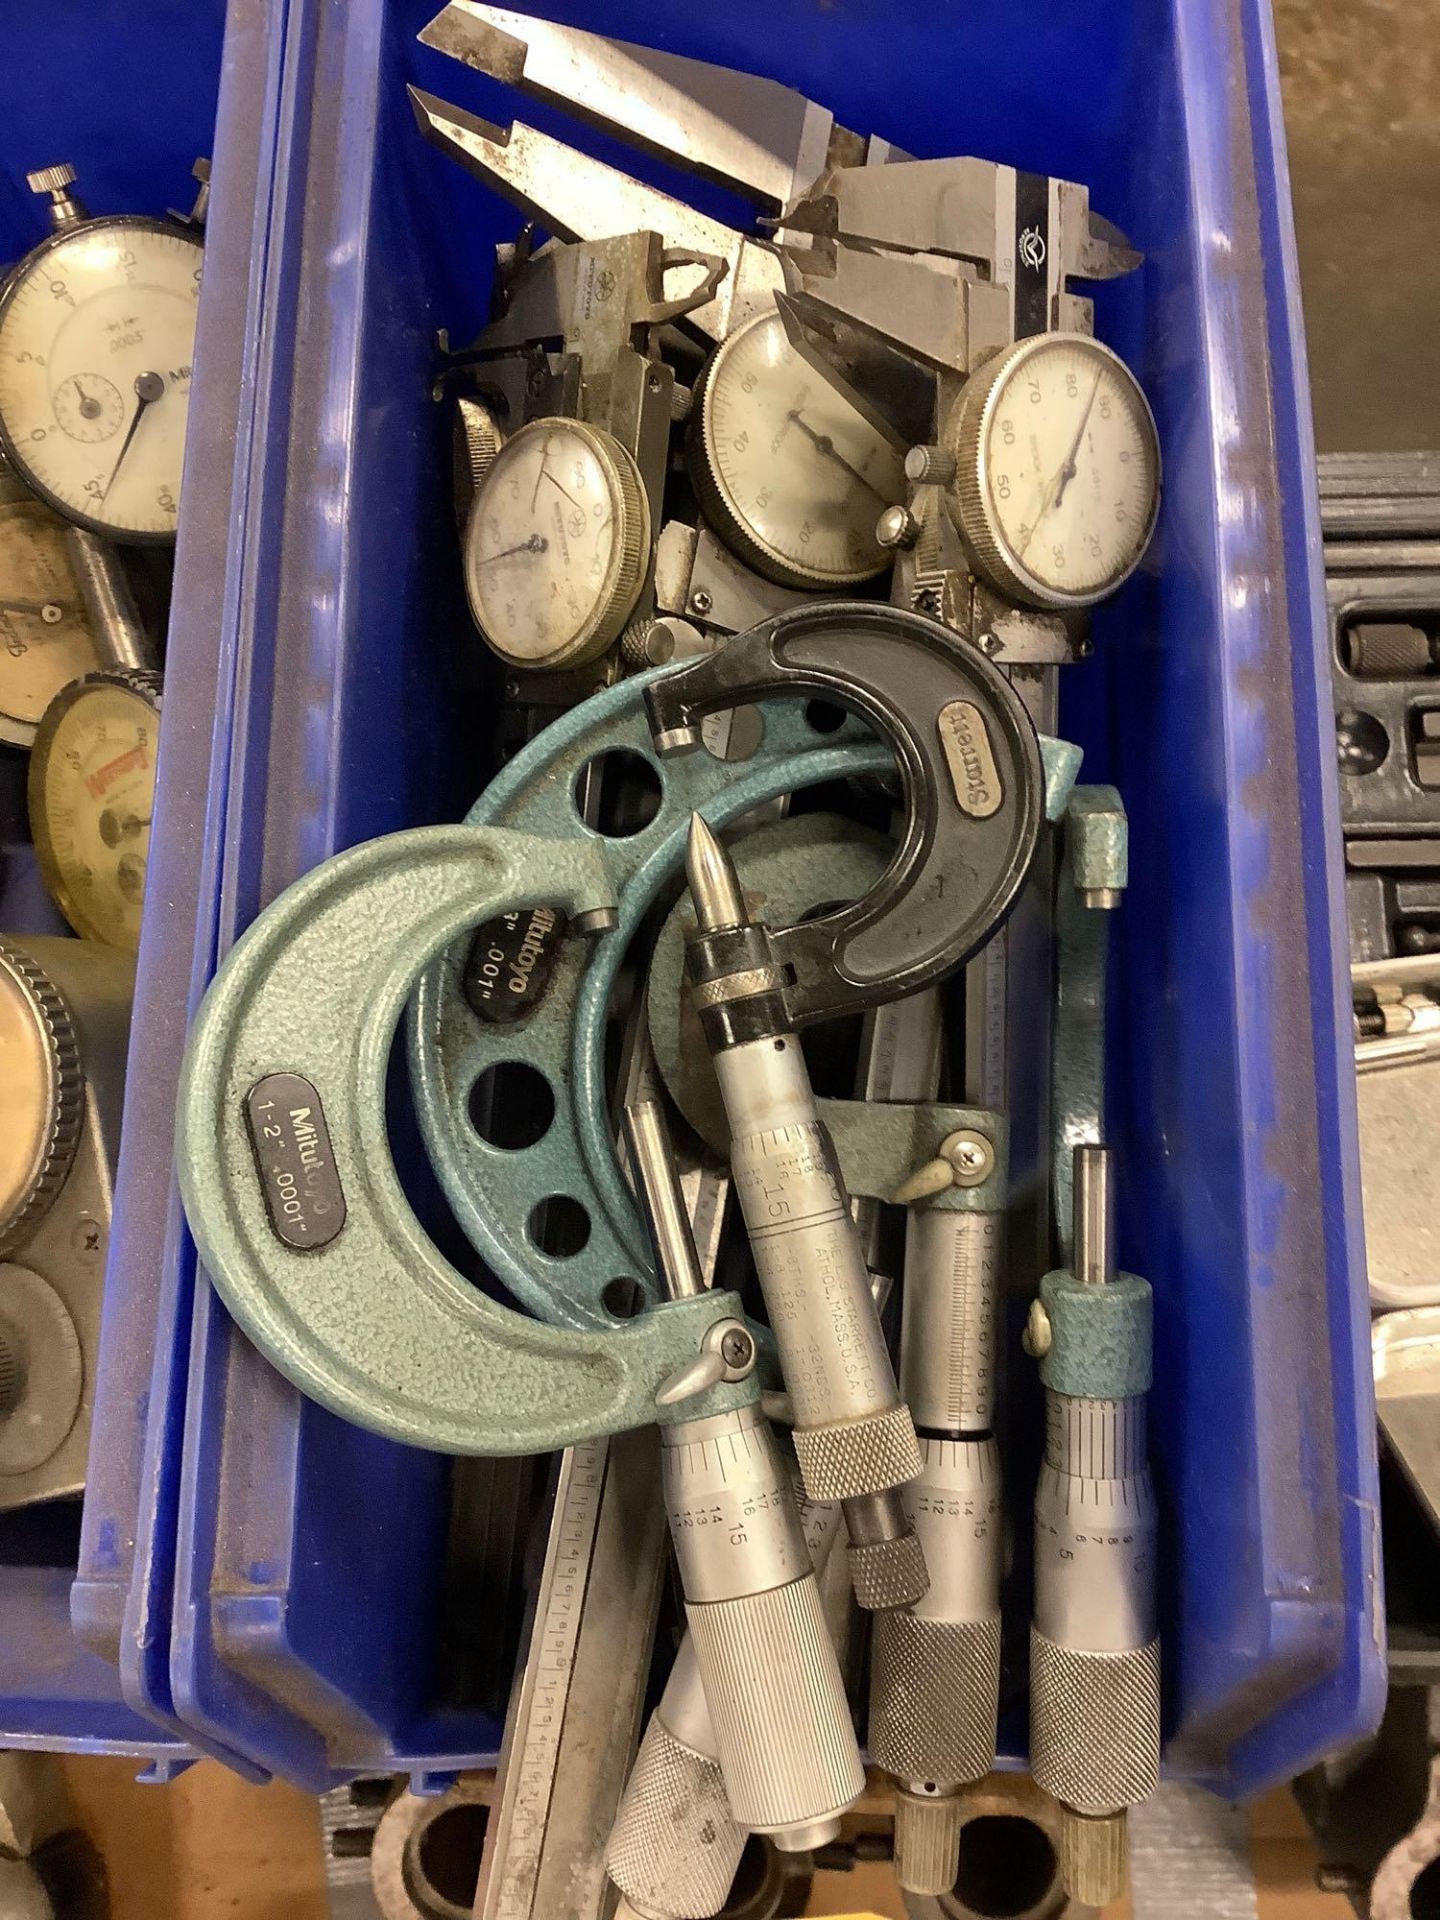 Lot: Calipers, Micrometers, Gauges; assorted sizes - Image 3 of 3